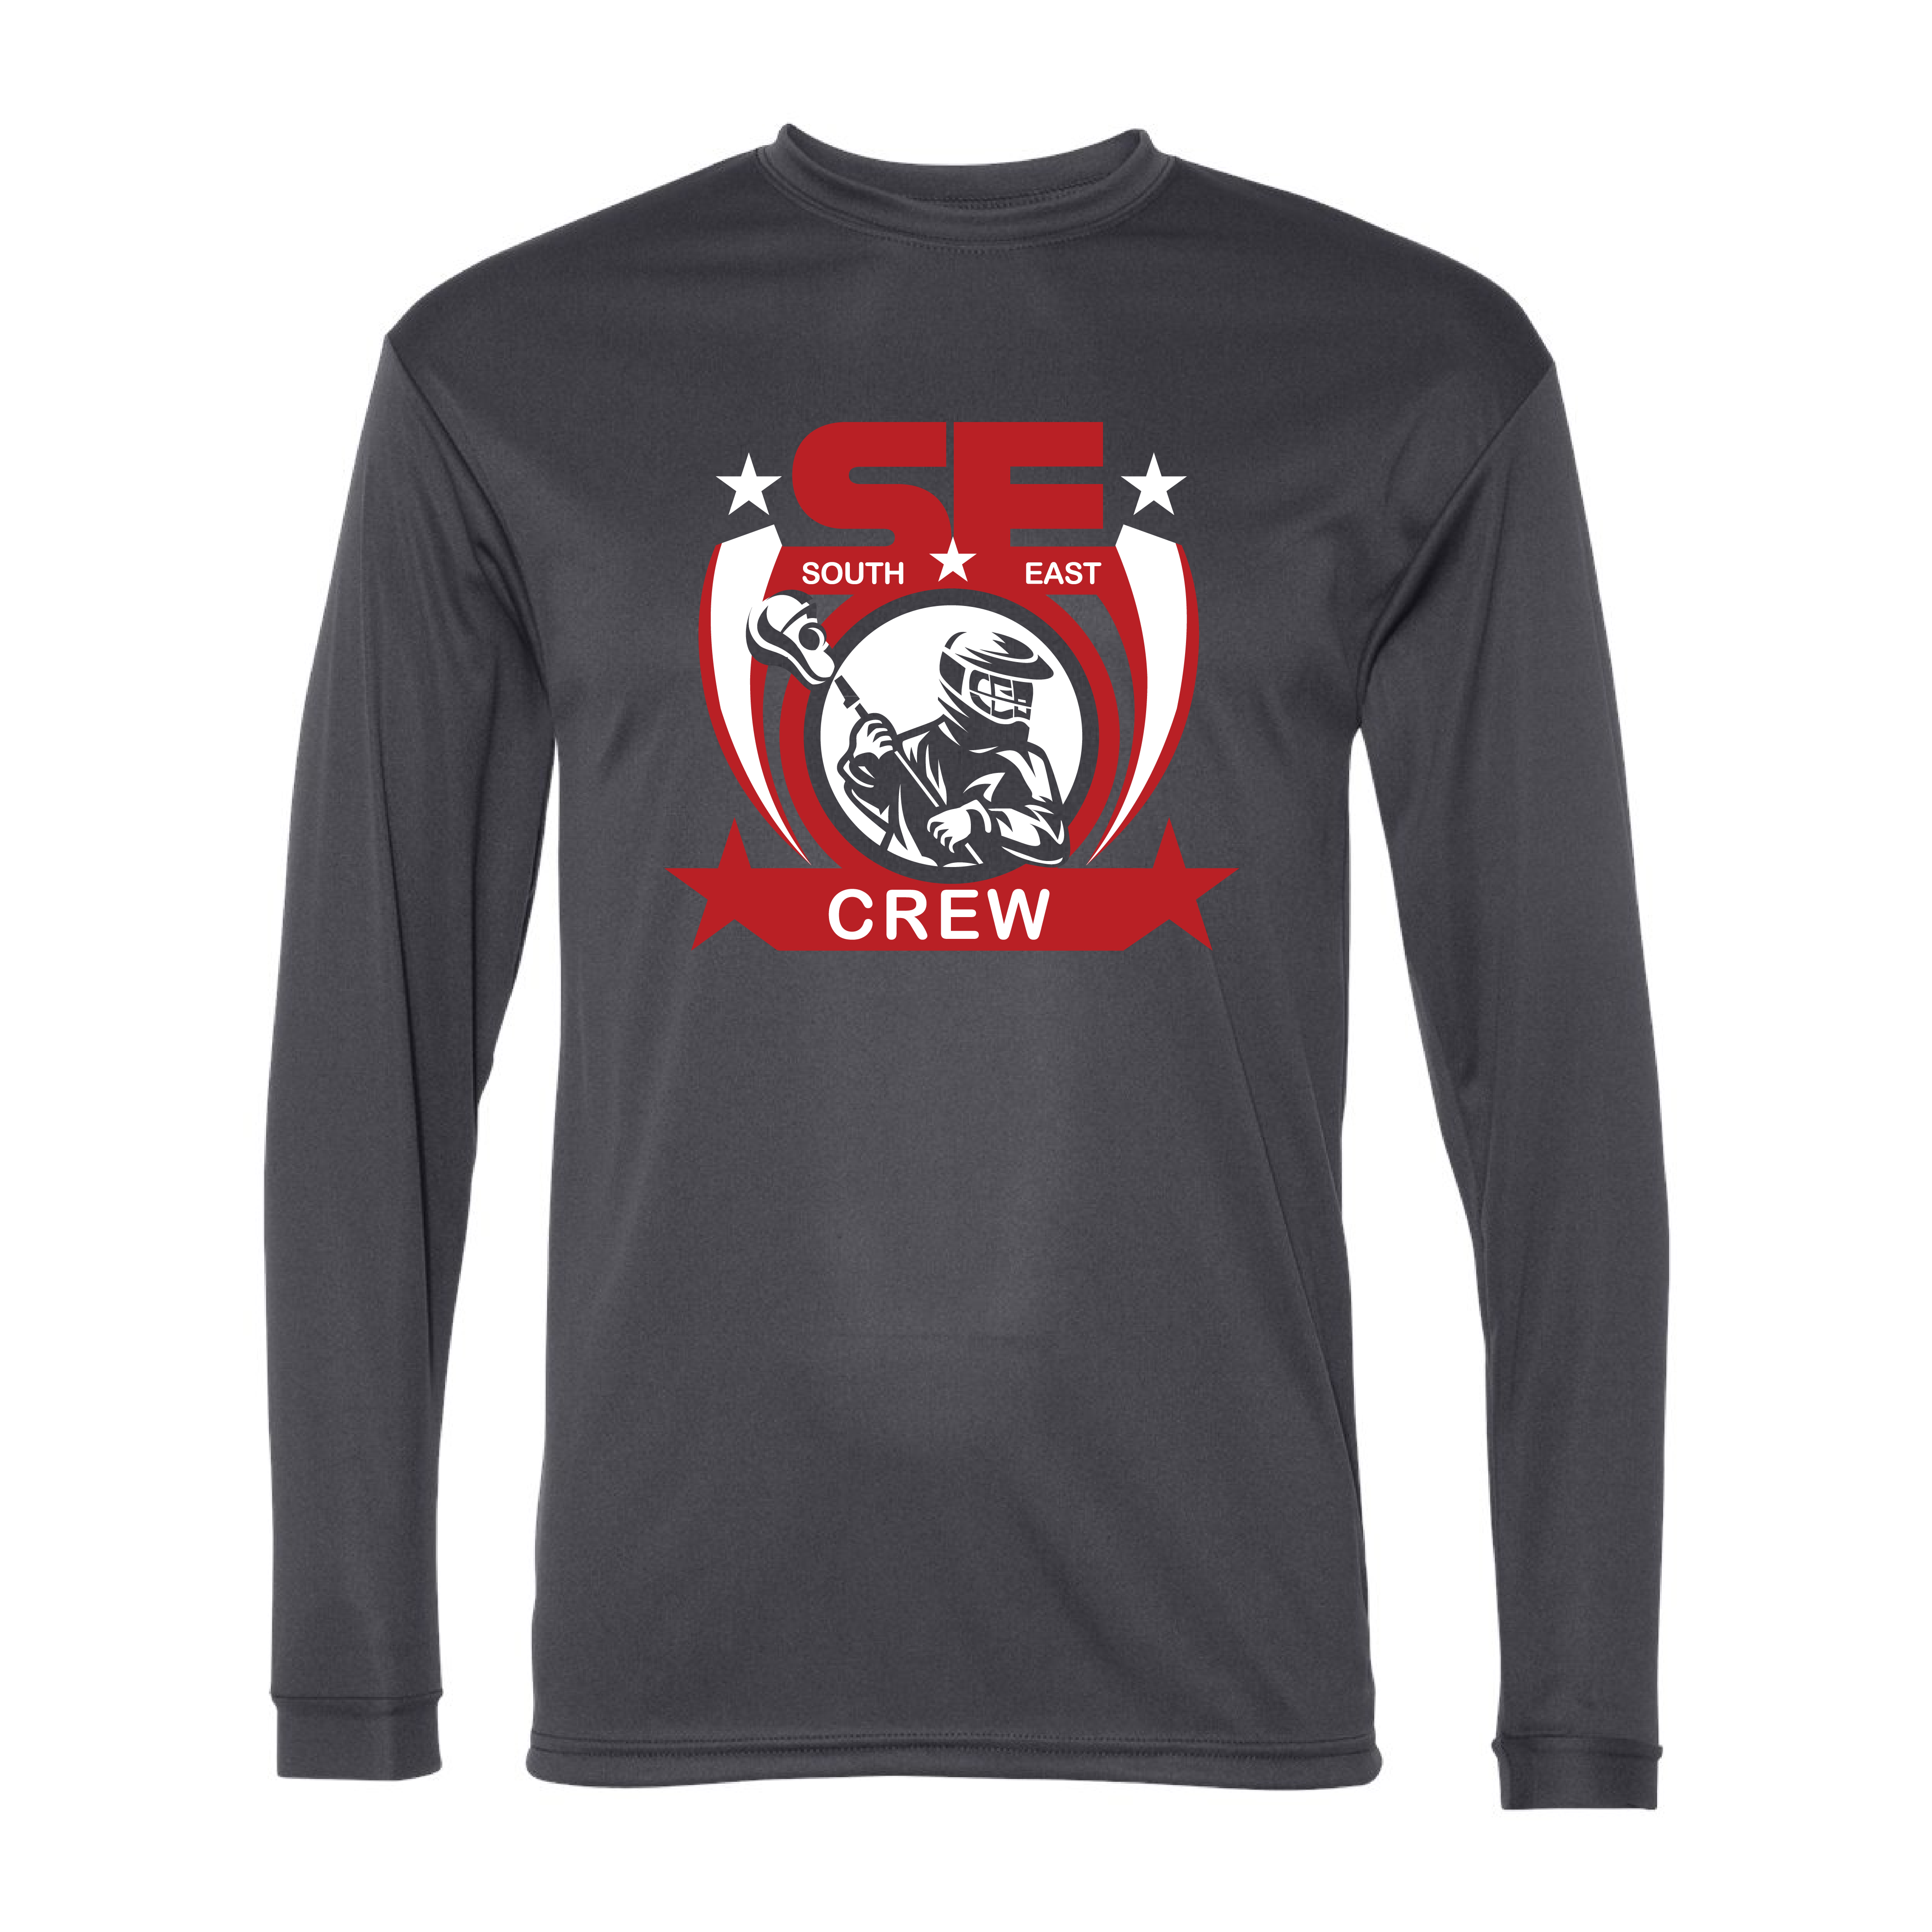 South East Crew Lacrosse Long Sleeve Performance T-Shirt